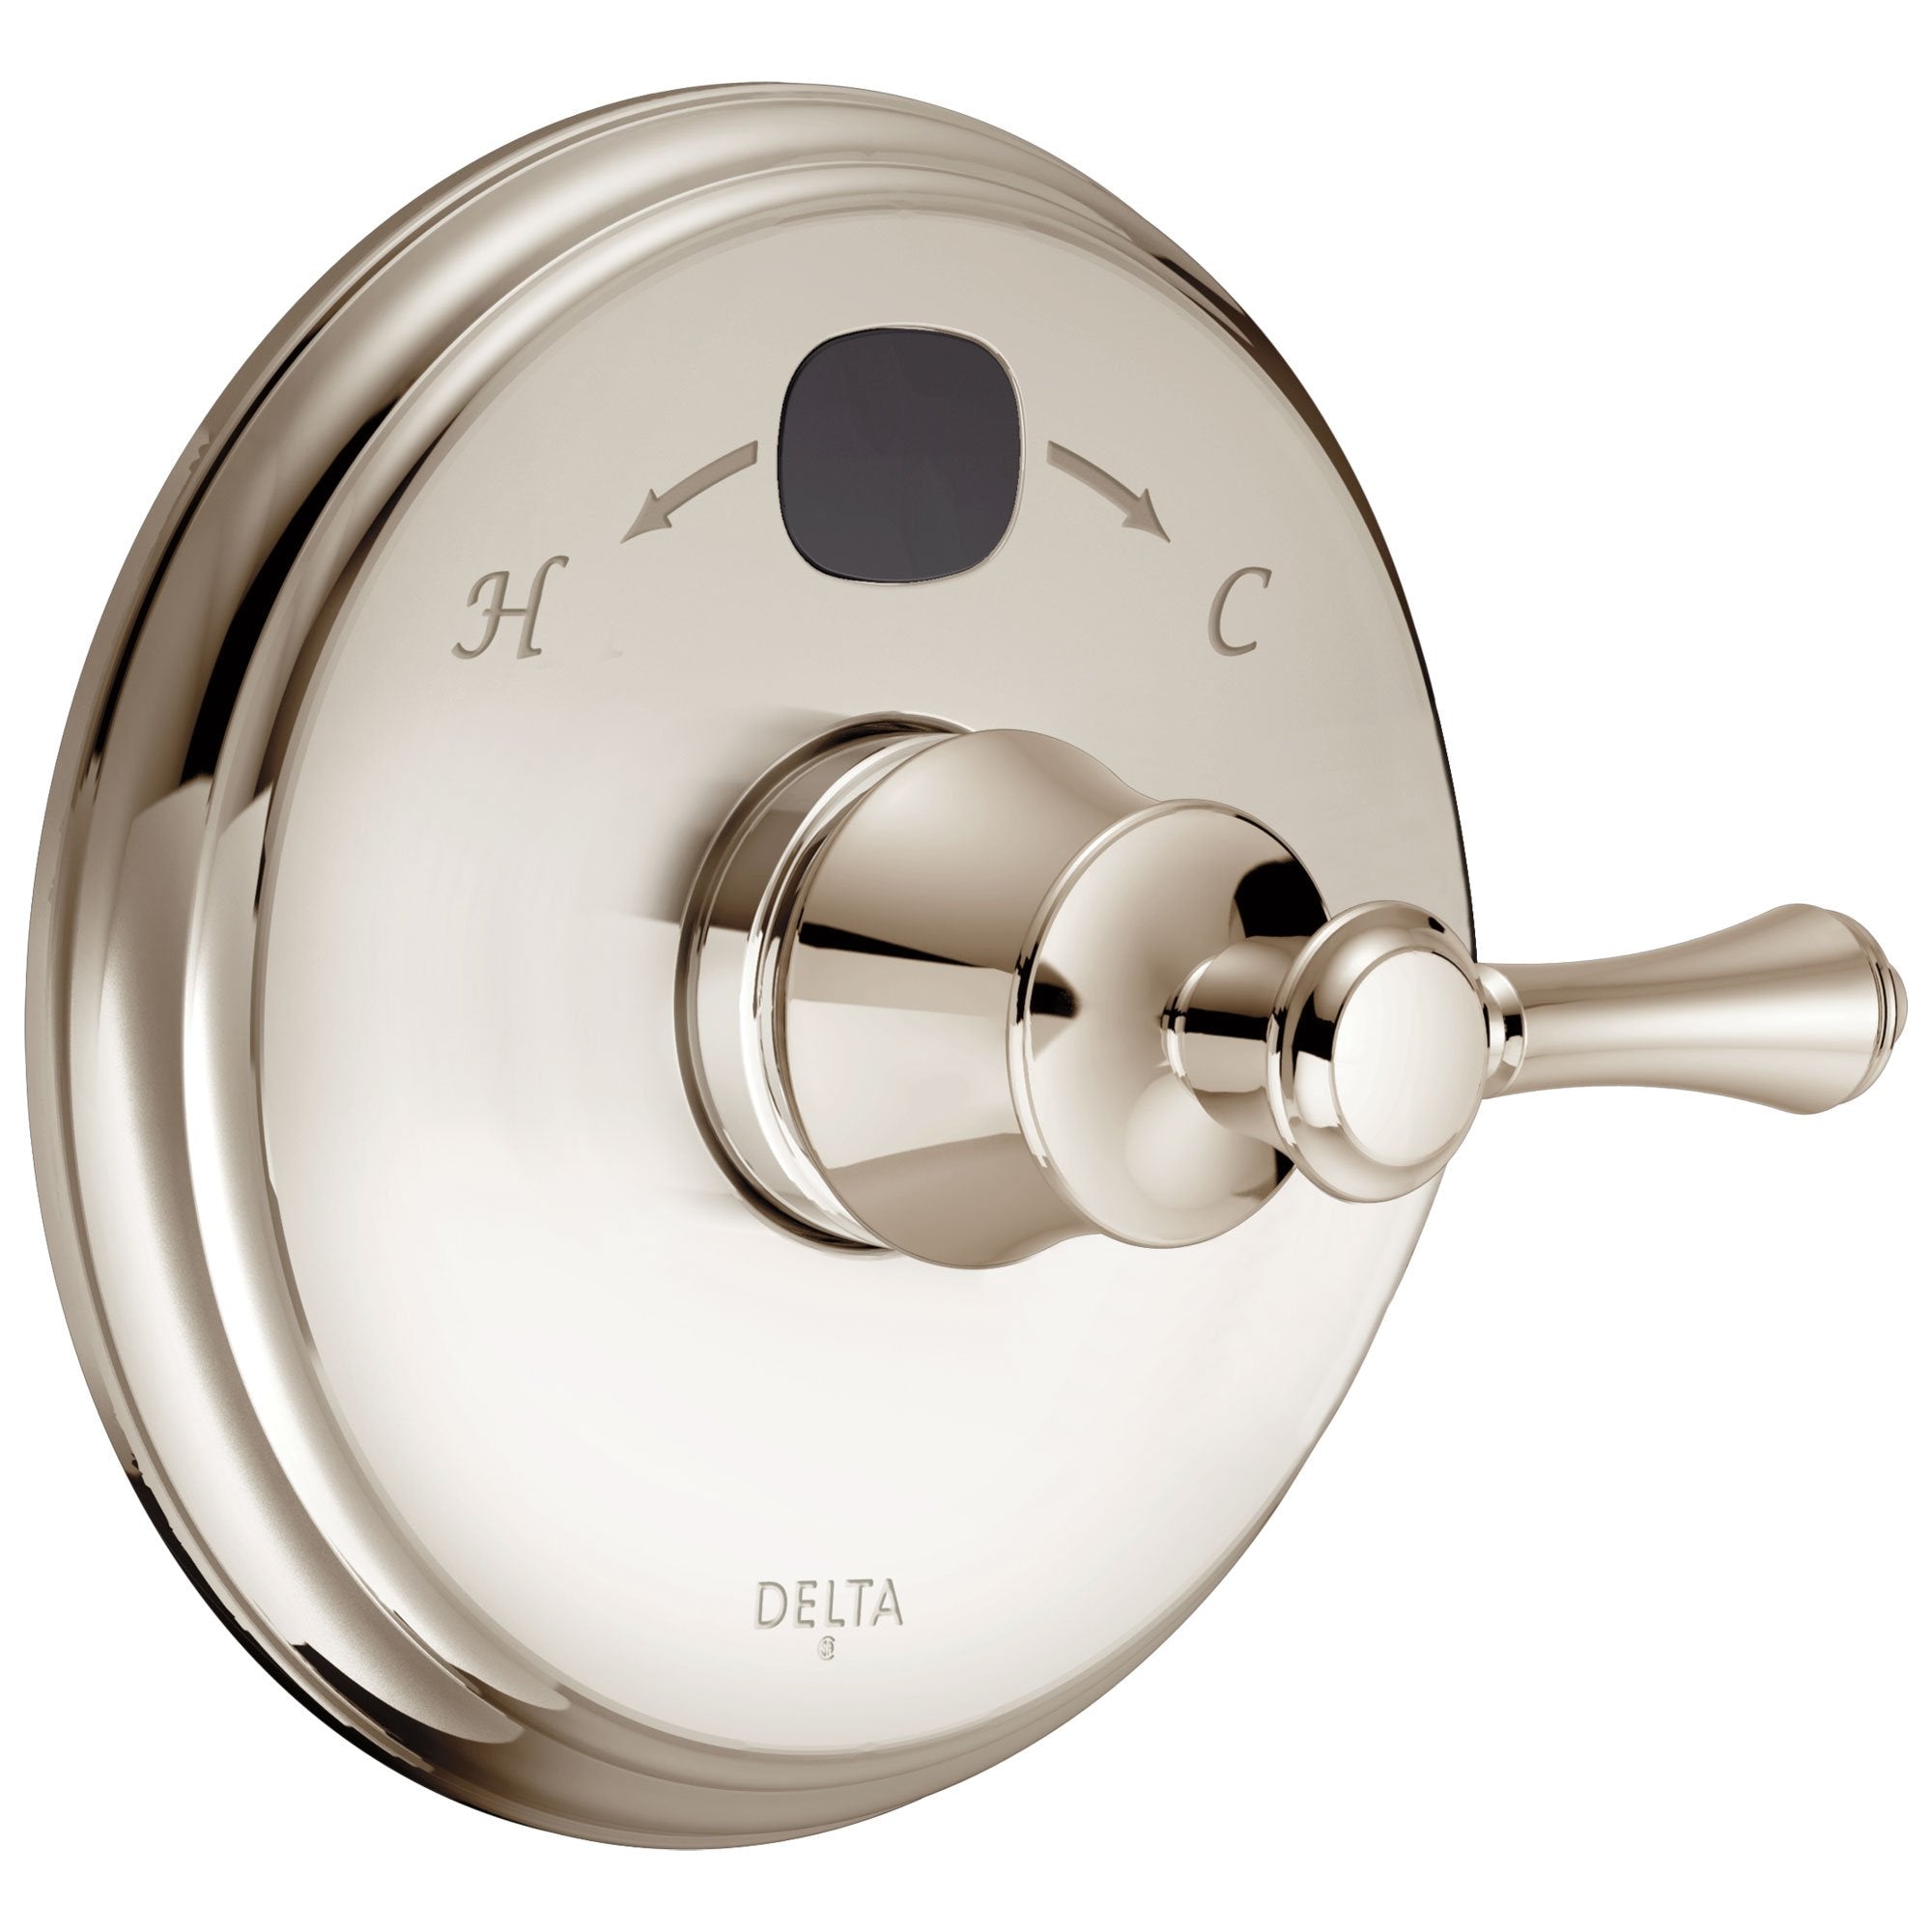 Delta Polished Nickel Cassidy 14 Series Digital Display Temp2O Shower Valve Control COMPLETE with Single Lever Handle and Rough-in Valve with Stops D1684V